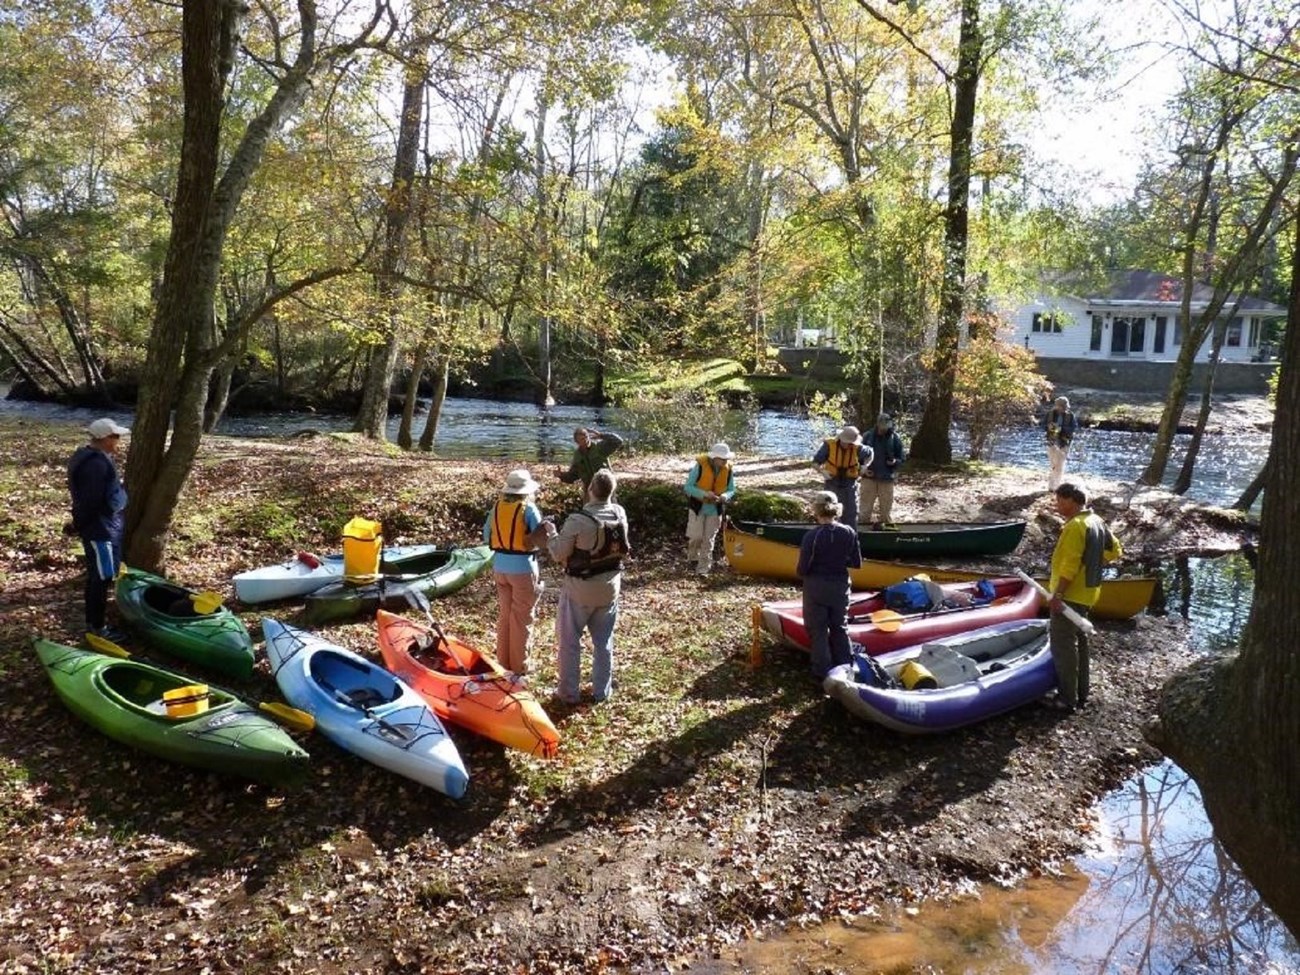 Kayakers get ready for a paddle on the Great Egg Harbor River. Photo Credit: Julie Akers.